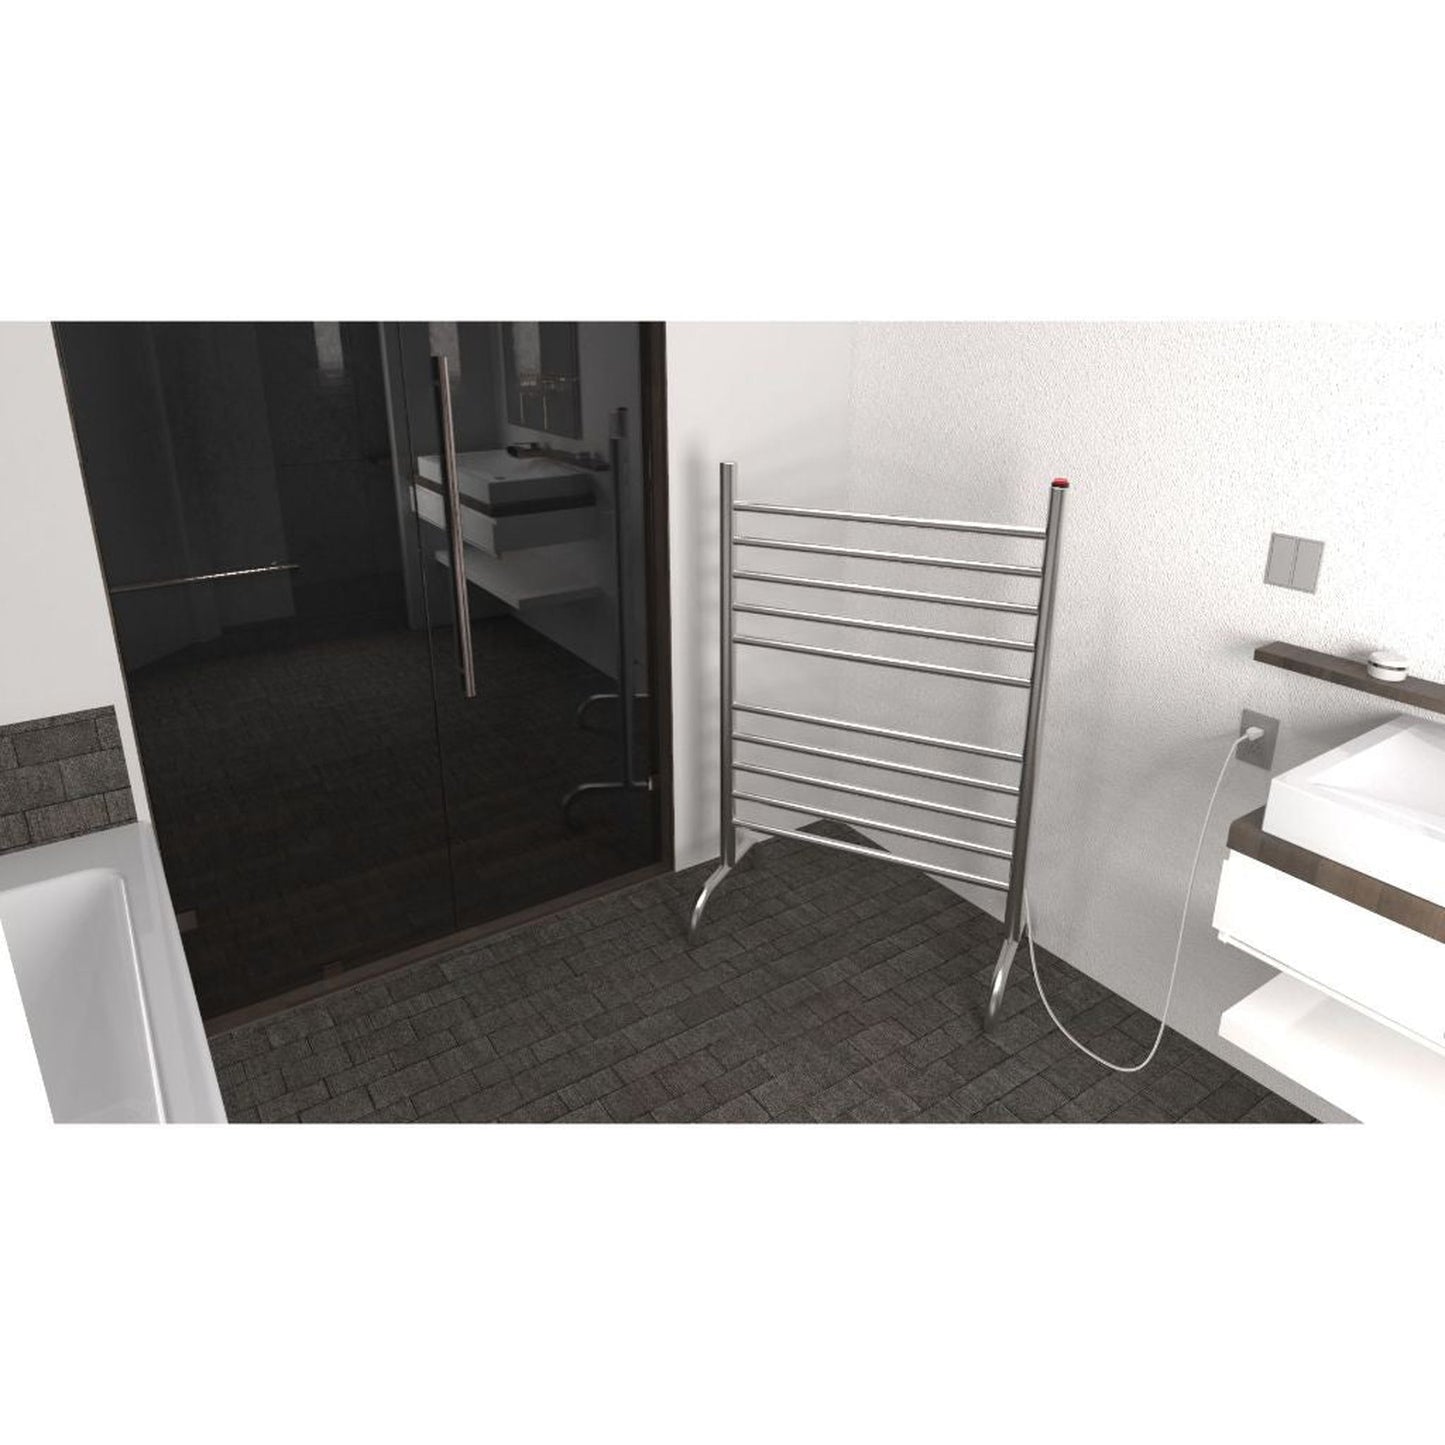 Amba Solo 24" Freestanding Polished Stainless Steel Plug-In Towel Warmer